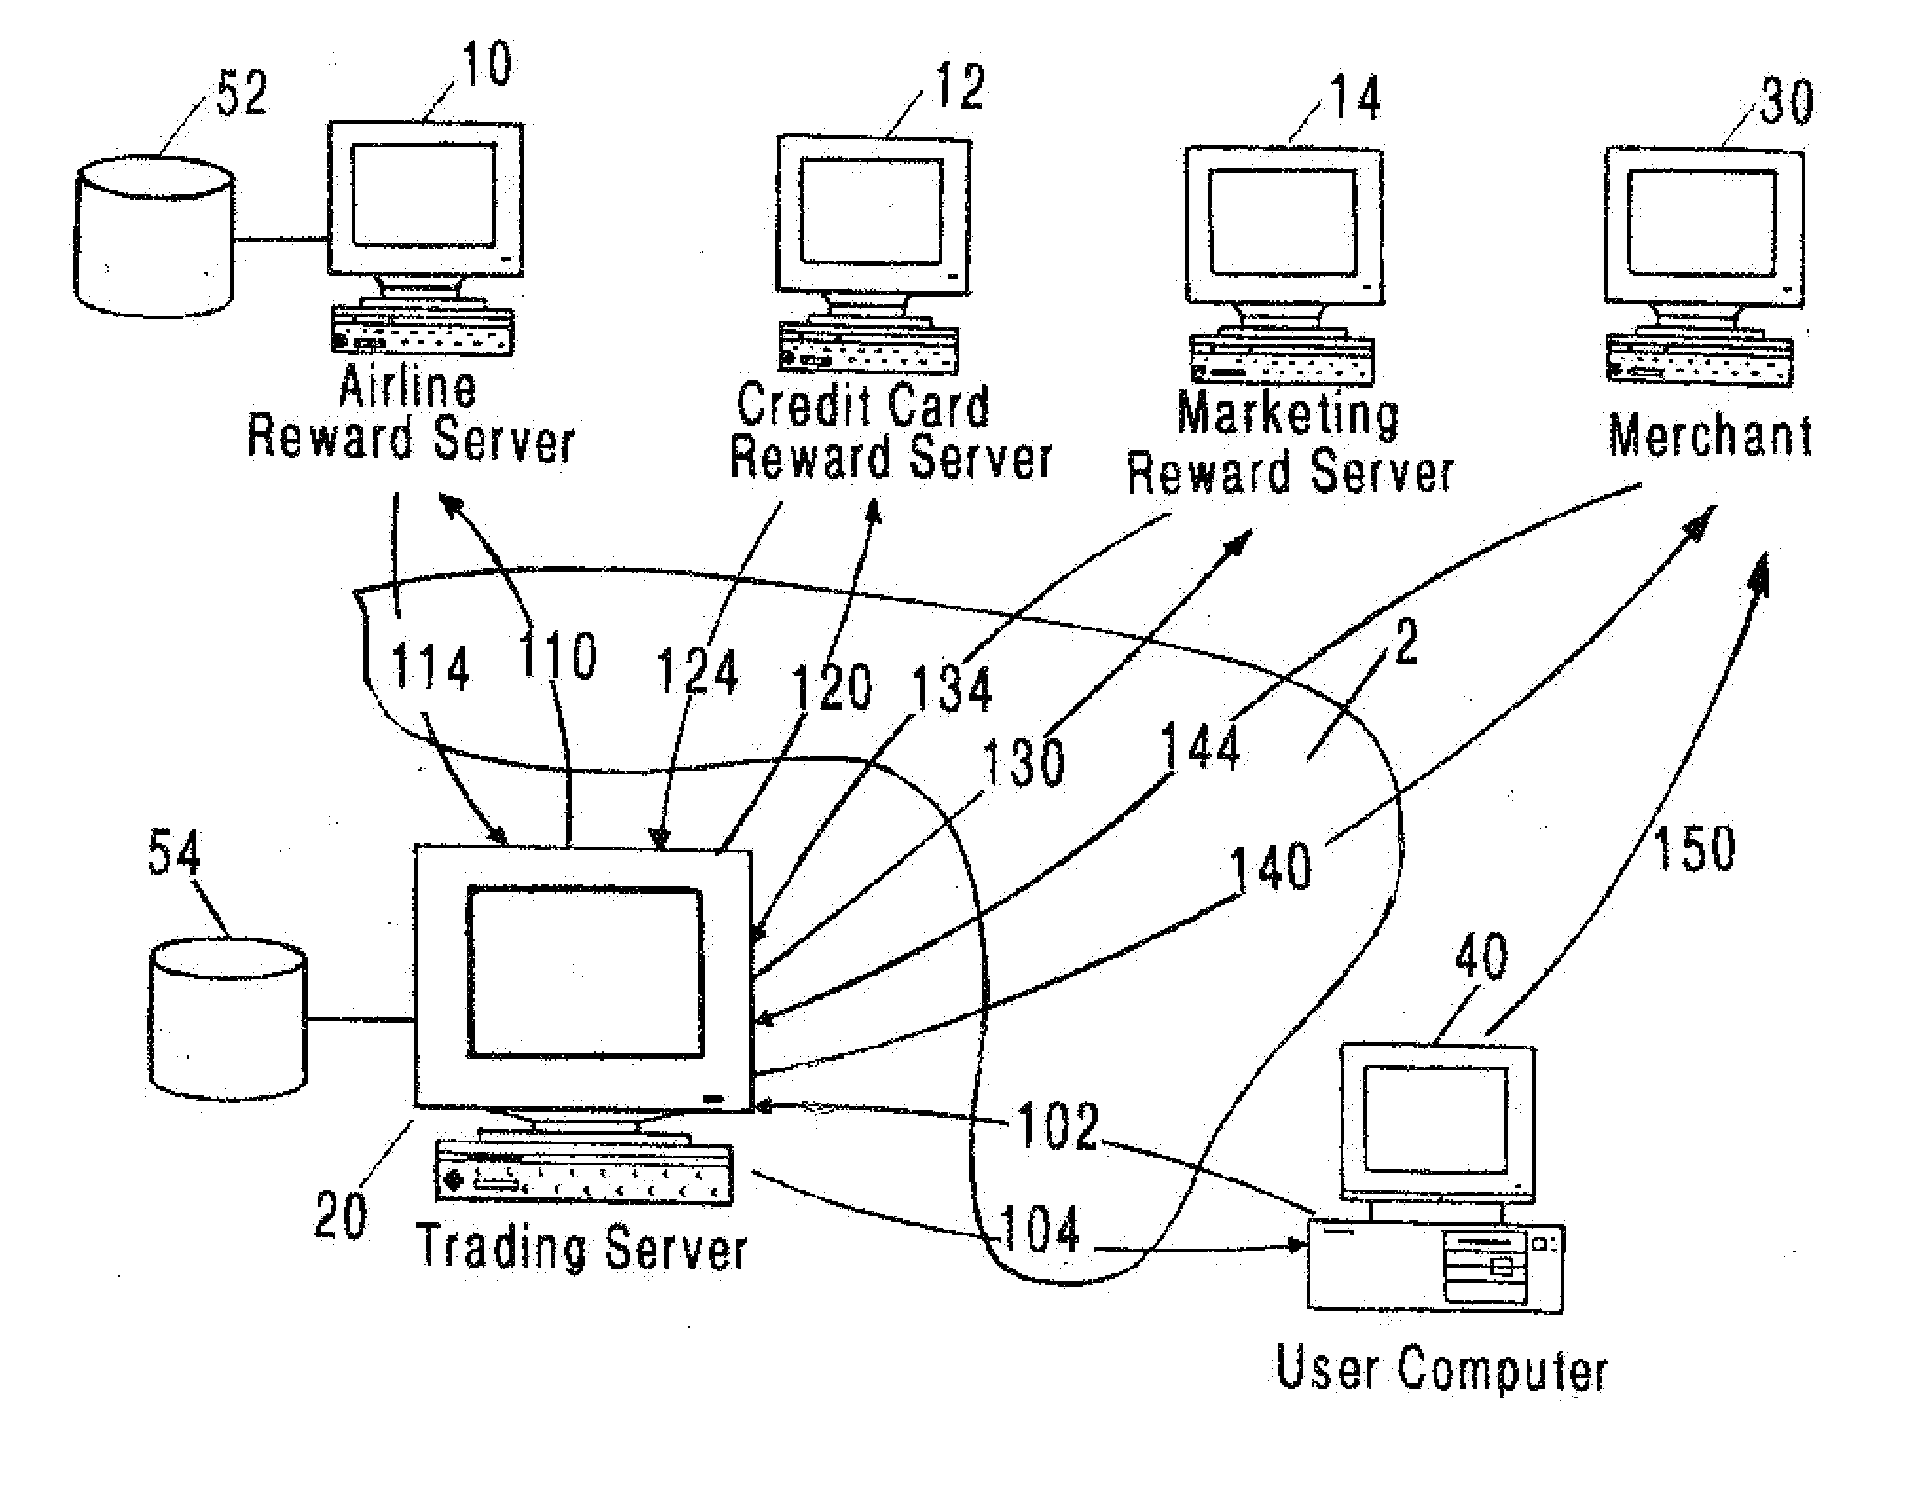 Broadcast television reward program and method of use for issuing, aggregating and redeeming sponsor's reward points